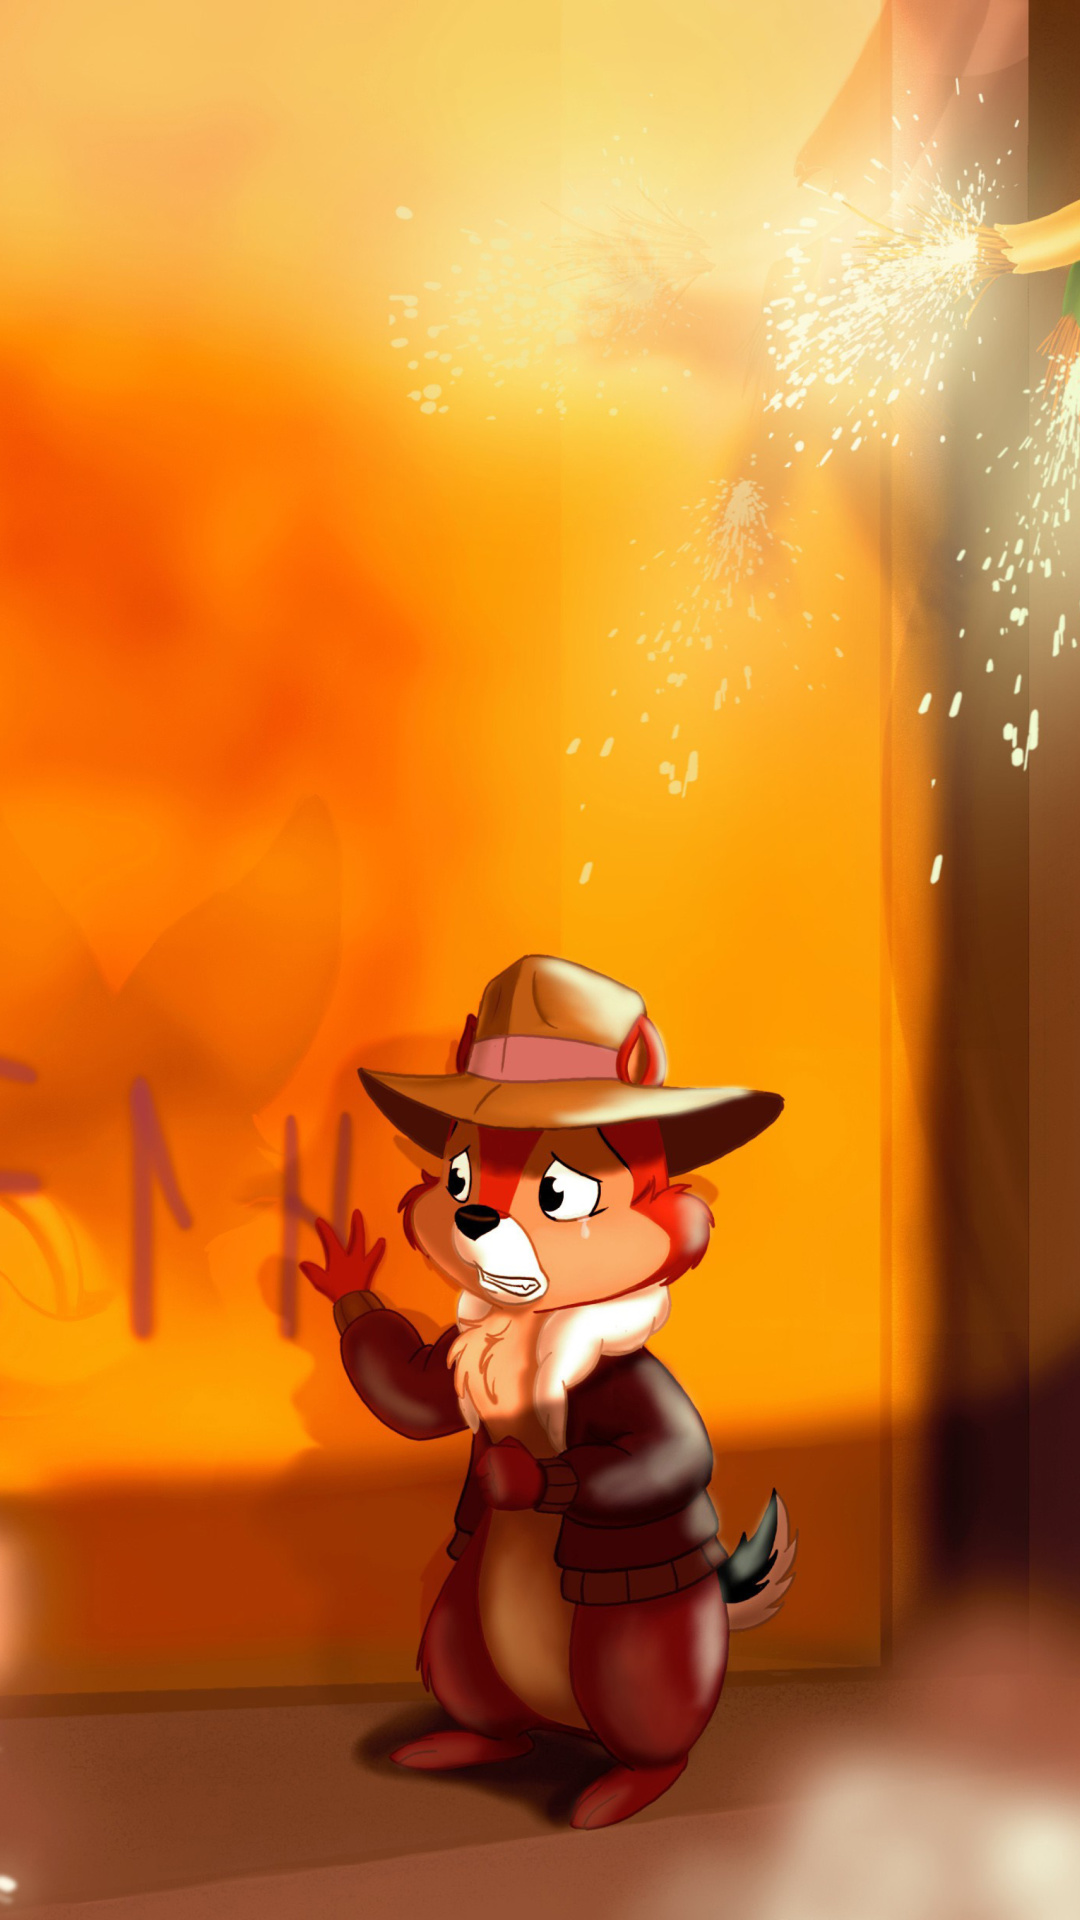 Das Chip and Dale Rescue Rangers 2 Wallpaper 1080x1920